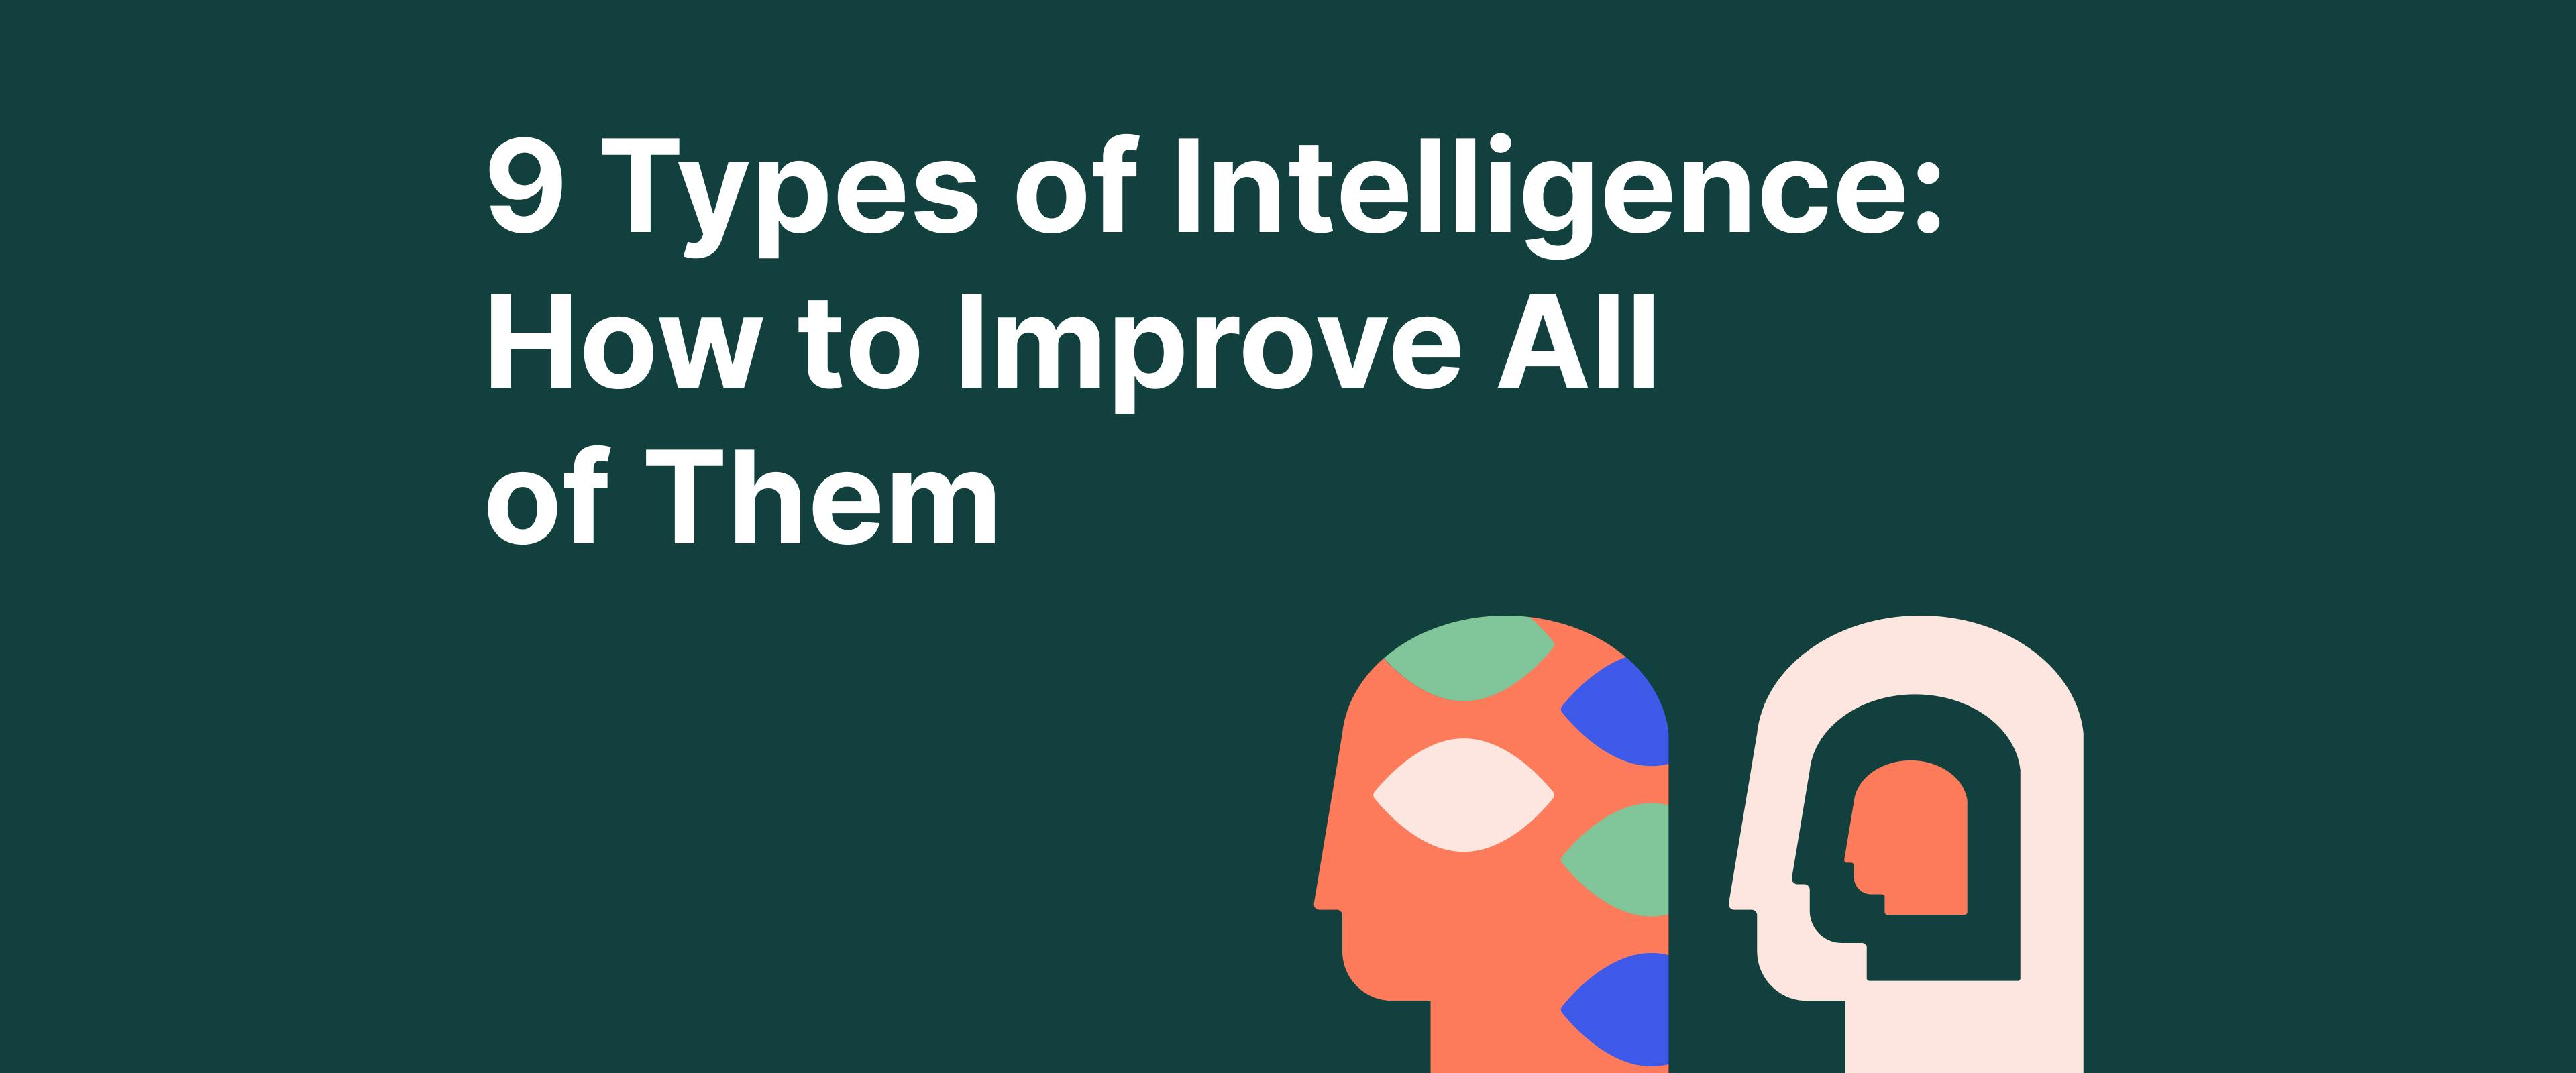 9 types of intelligence and how to improve them all